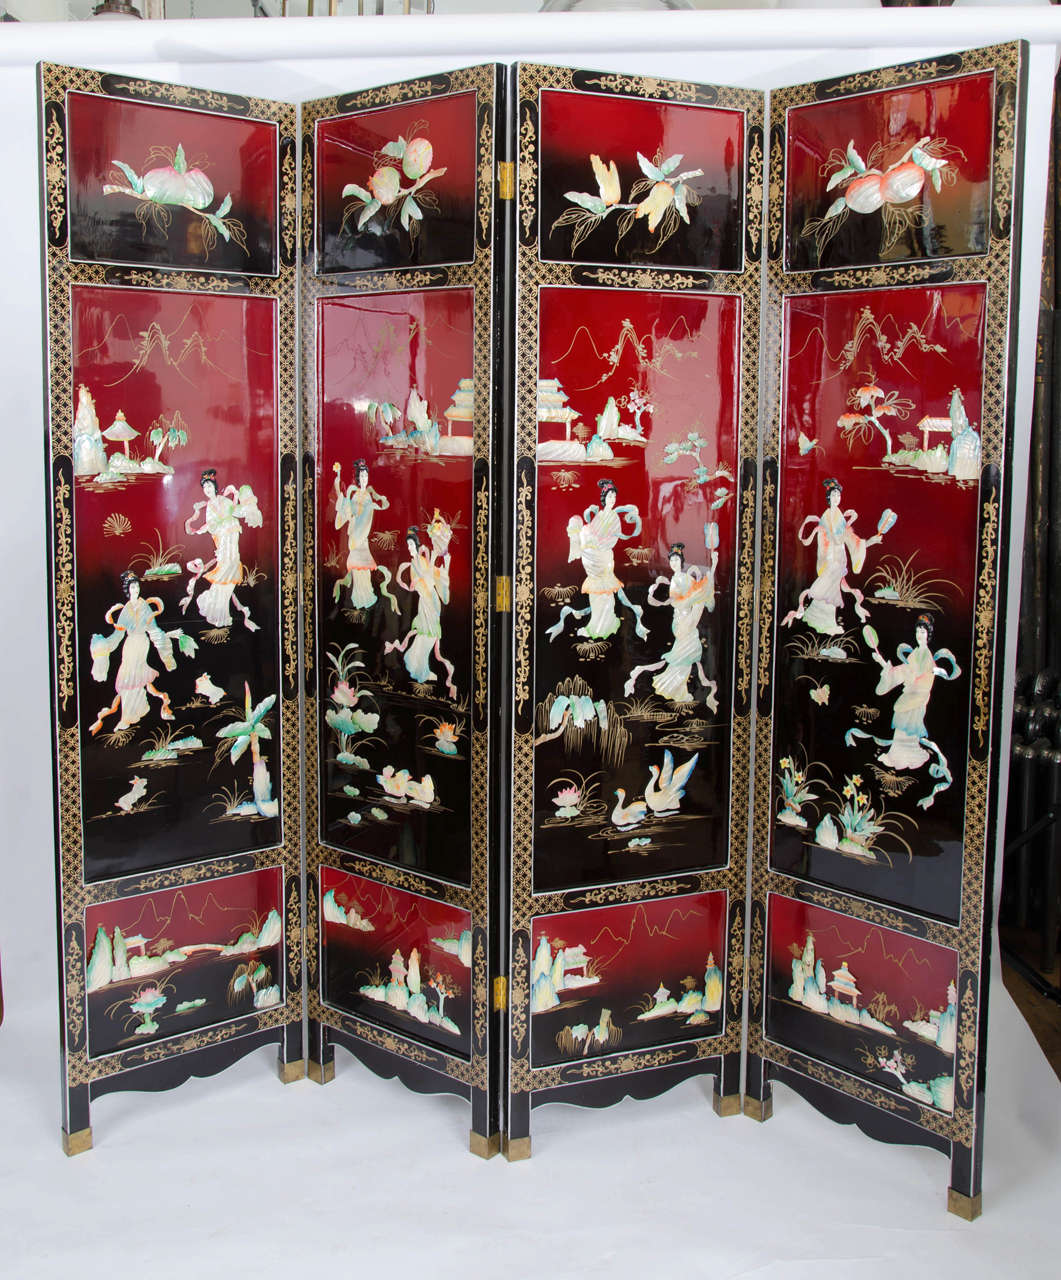 A striking vintage coromandel screen. This room divider has a rich, red and black background with mother of pearl decoration. One side of the screen features floral, garden and landscape scenes separated by strips of geometric patterns. The other